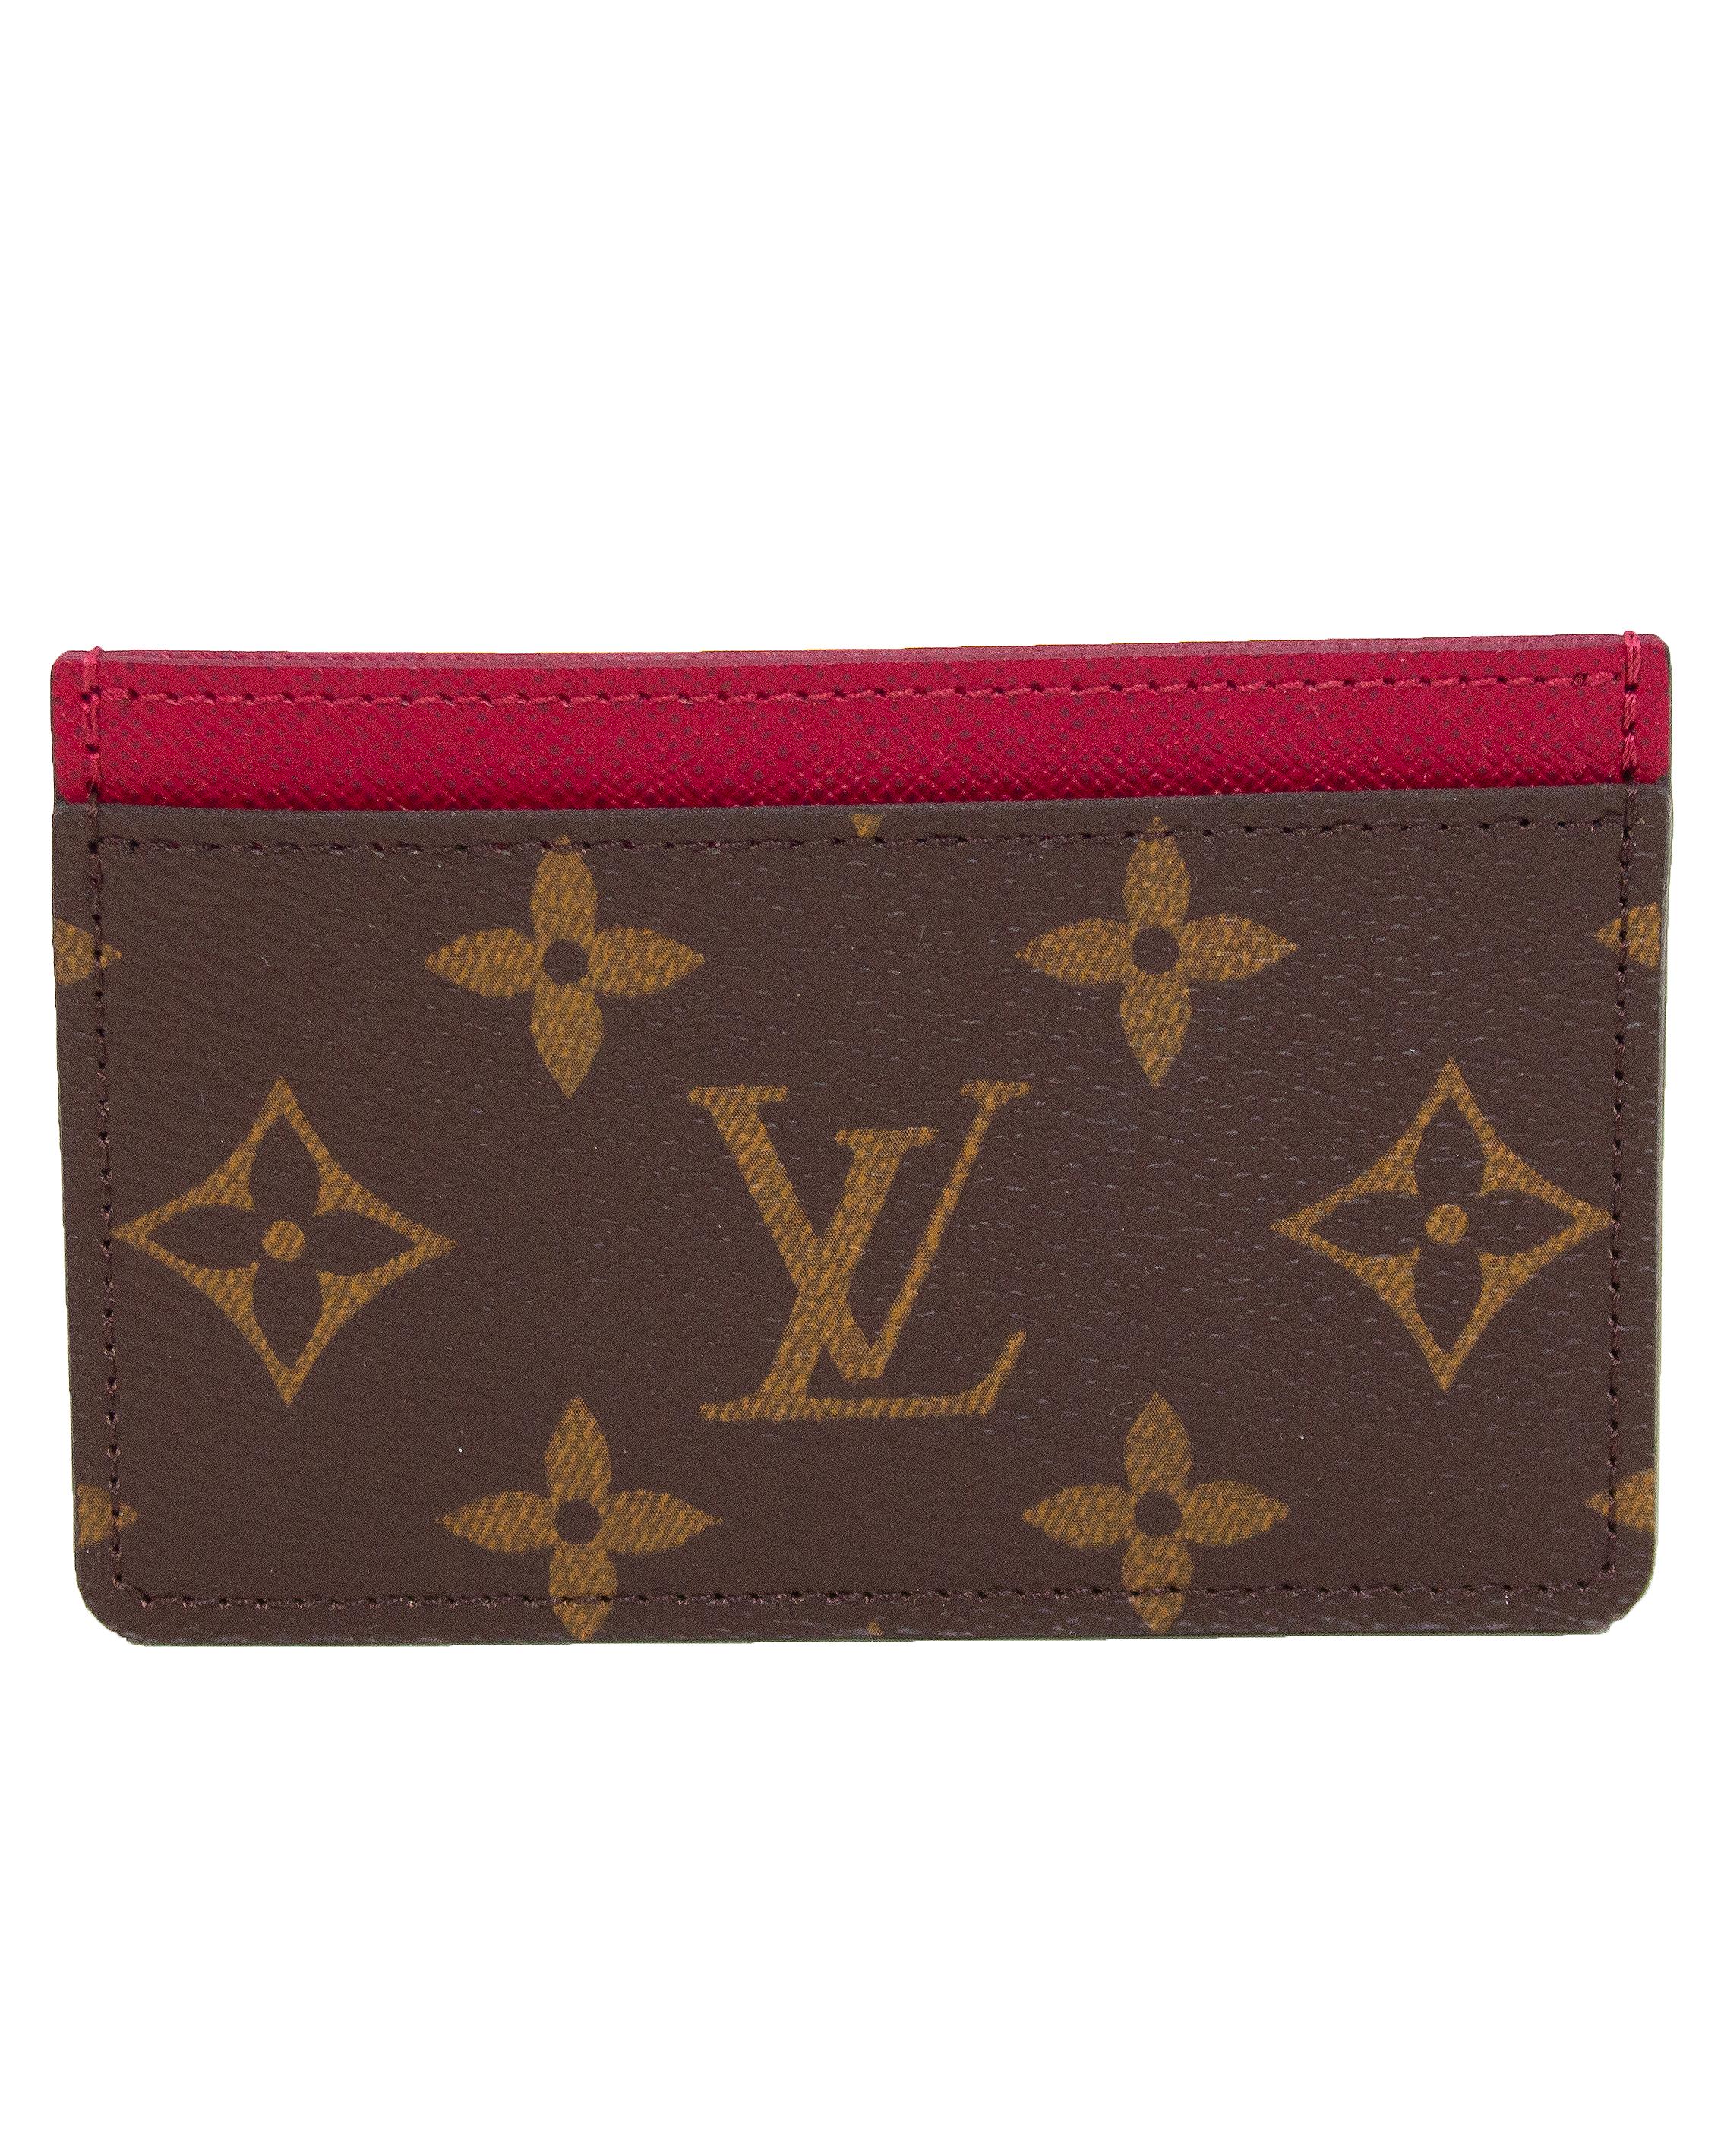 Louis Vuitton monogram card case with raspberry accent interior from the 2000s. In excellent condition with matching dust sleeve, the perfect, timeless accessory. 

4.5